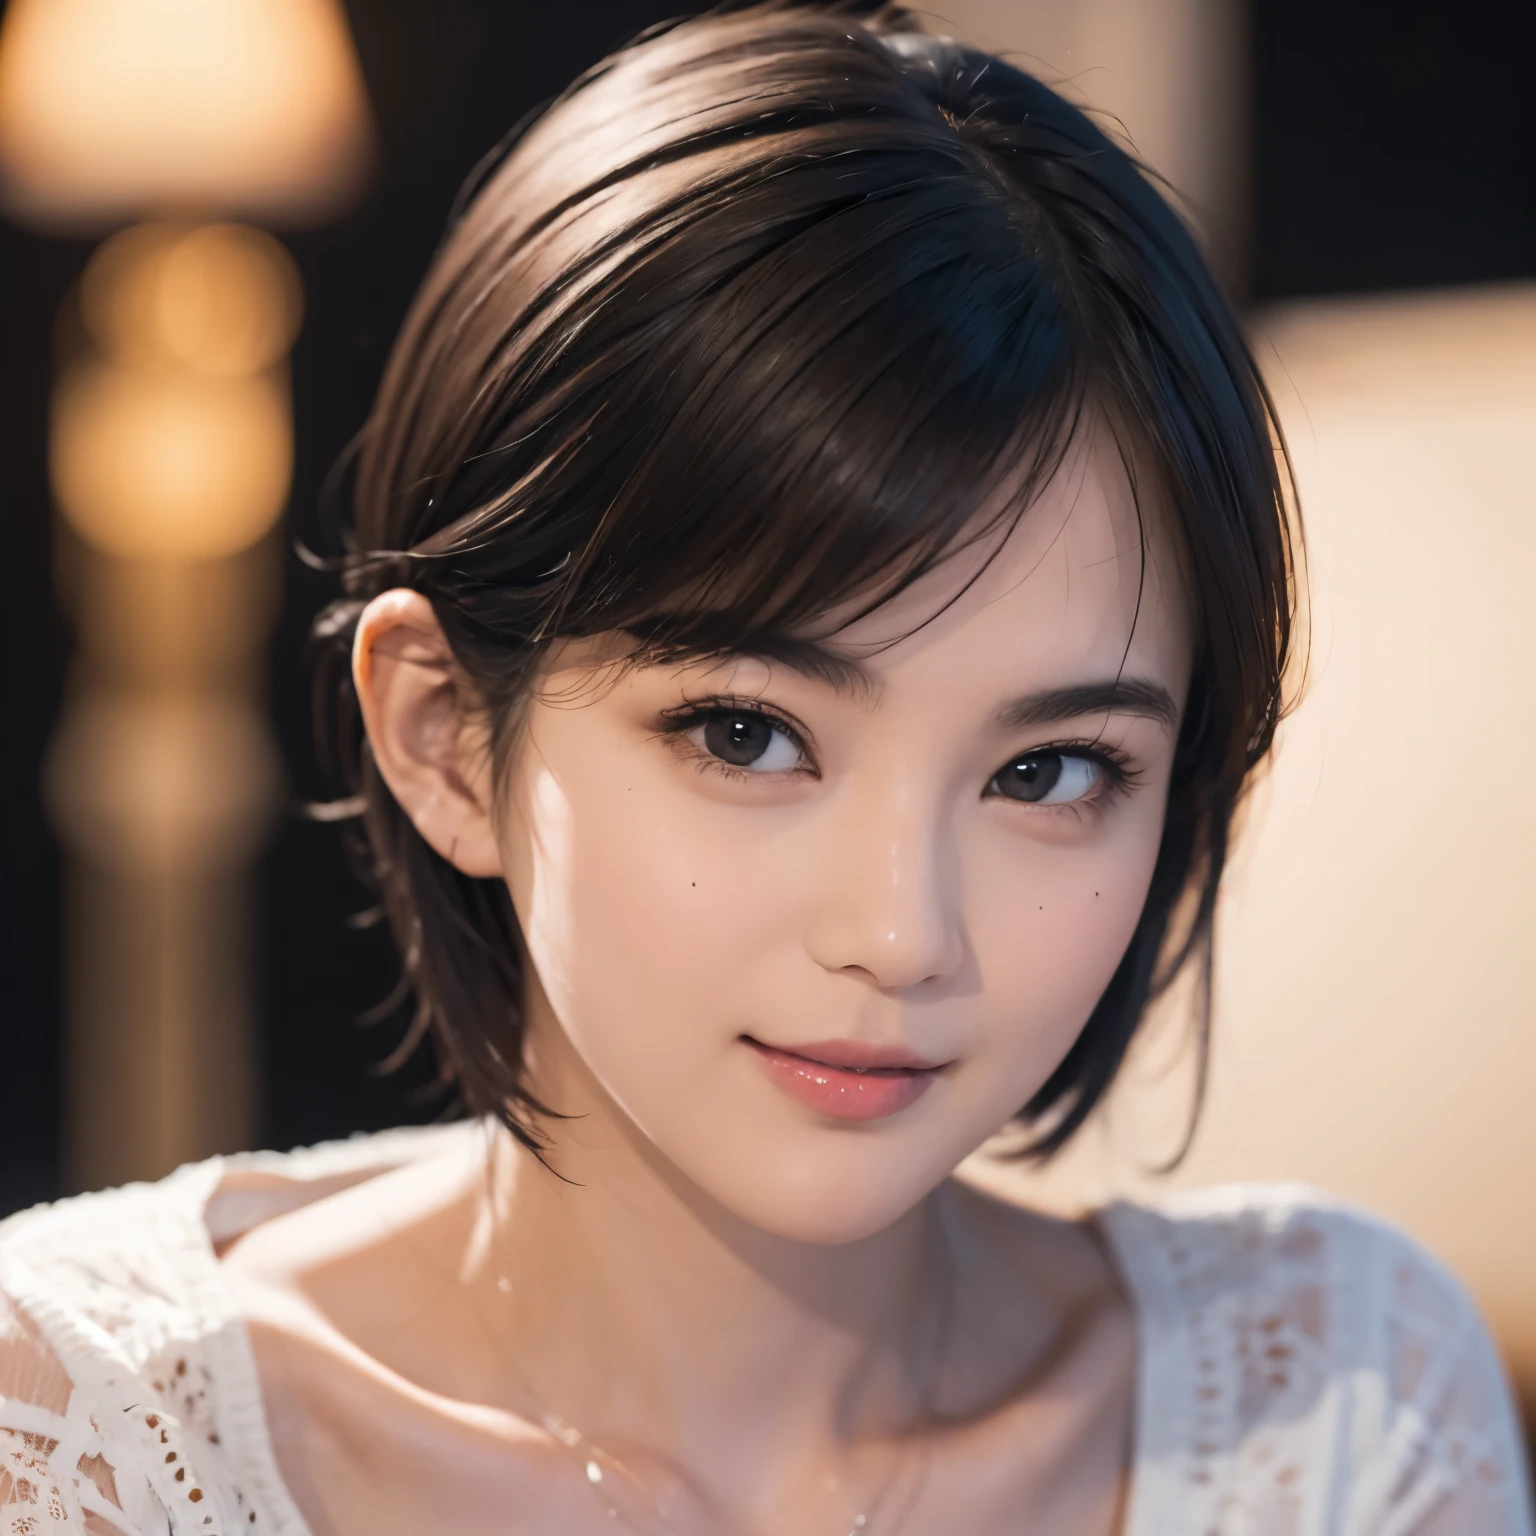 144
(20 year old woman,Are standing), (Super realistic), (High resolution), ((beautiful hairstyle 46)), ((short hair:1.46)), (gentle smile), (breasted:1.1), (lipstick)
